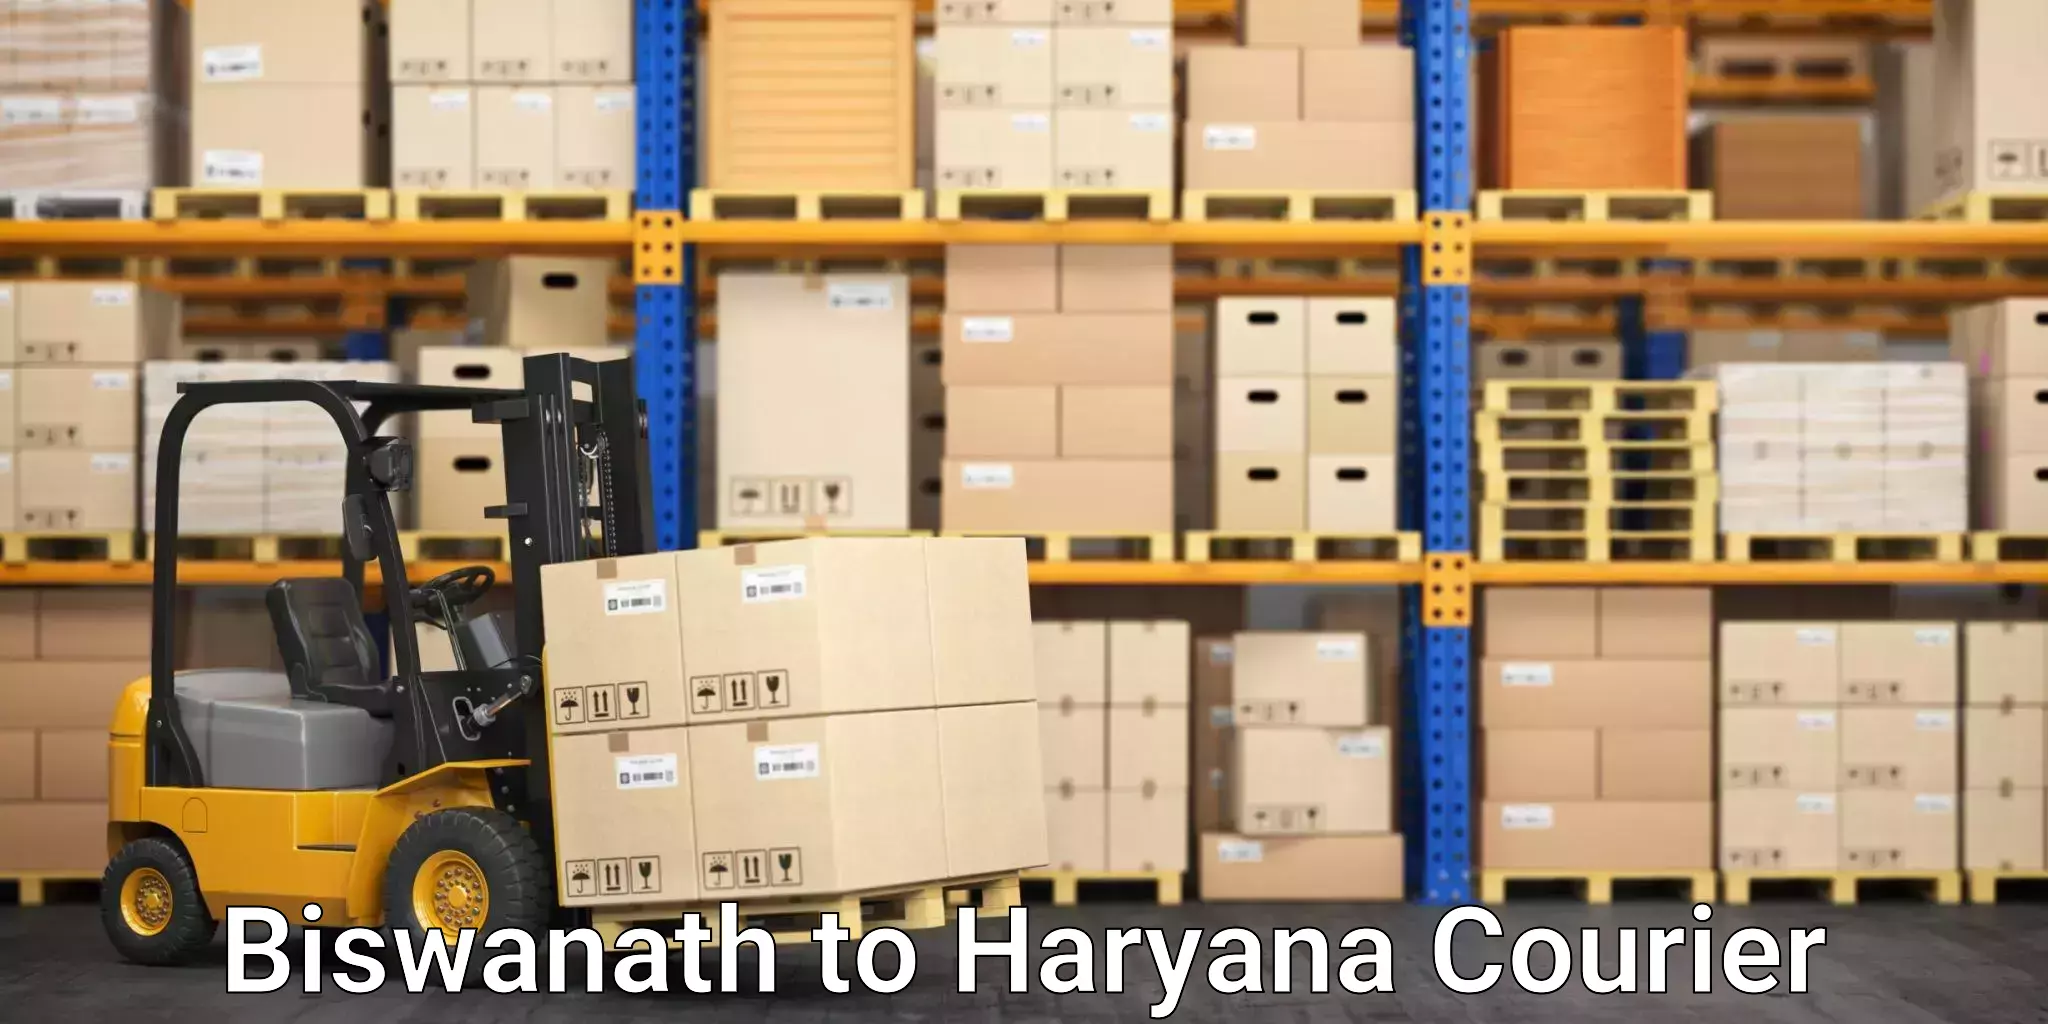 Innovative shipping solutions in Biswanath to Gurgaon